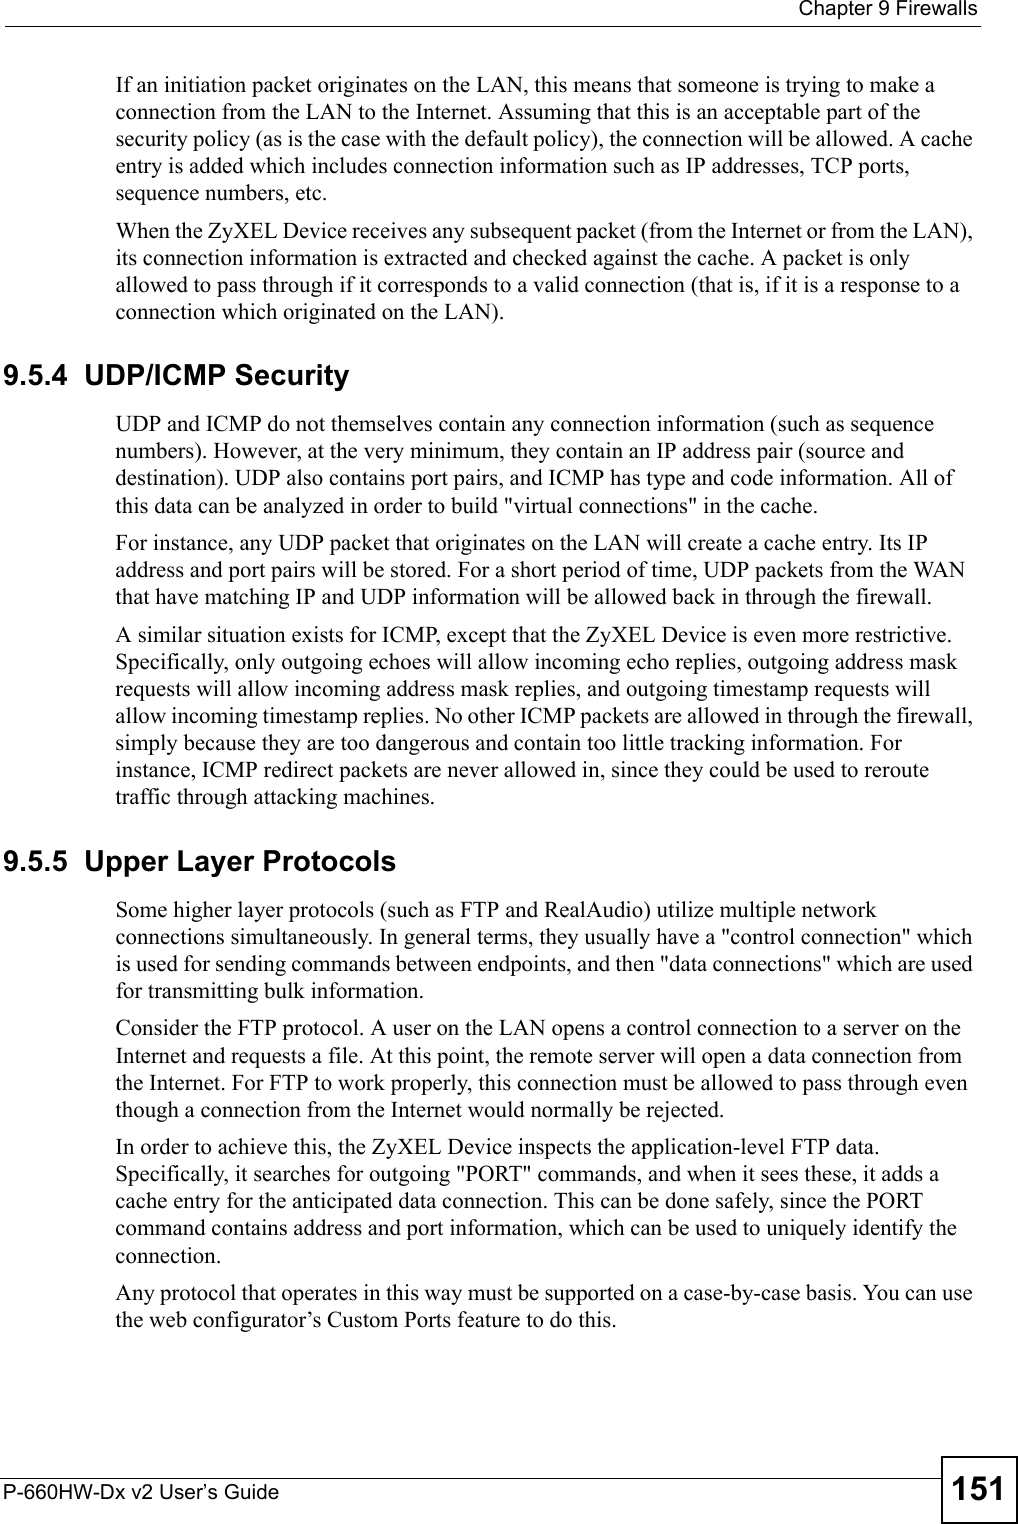  Chapter 9 FirewallsP-660HW-Dx v2 User’s Guide 151If an initiation packet originates on the LAN, this means that someone is trying to make a connection from the LAN to the Internet. Assuming that this is an acceptable part of the security policy (as is the case with the default policy), the connection will be allowed. A cache entry is added which includes connection information such as IP addresses, TCP ports, sequence numbers, etc.When the ZyXEL Device receives any subsequent packet (from the Internet or from the LAN), its connection information is extracted and checked against the cache. A packet is only allowed to pass through if it corresponds to a valid connection (that is, if it is a response to a connection which originated on the LAN).9.5.4  UDP/ICMP SecurityUDP and ICMP do not themselves contain any connection information (such as sequence numbers). However, at the very minimum, they contain an IP address pair (source and destination). UDP also contains port pairs, and ICMP has type and code information. All of this data can be analyzed in order to build &quot;virtual connections&quot; in the cache. For instance, any UDP packet that originates on the LAN will create a cache entry. Its IP address and port pairs will be stored. For a short period of time, UDP packets from the WAN that have matching IP and UDP information will be allowed back in through the firewall.A similar situation exists for ICMP, except that the ZyXEL Device is even more restrictive. Specifically, only outgoing echoes will allow incoming echo replies, outgoing address mask requests will allow incoming address mask replies, and outgoing timestamp requests will allow incoming timestamp replies. No other ICMP packets are allowed in through the firewall, simply because they are too dangerous and contain too little tracking information. For instance, ICMP redirect packets are never allowed in, since they could be used to reroute traffic through attacking machines. 9.5.5  Upper Layer ProtocolsSome higher layer protocols (such as FTP and RealAudio) utilize multiple network connections simultaneously. In general terms, they usually have a &quot;control connection&quot; which is used for sending commands between endpoints, and then &quot;data connections&quot; which are used for transmitting bulk information. Consider the FTP protocol. A user on the LAN opens a control connection to a server on the Internet and requests a file. At this point, the remote server will open a data connection from the Internet. For FTP to work properly, this connection must be allowed to pass through even though a connection from the Internet would normally be rejected.In order to achieve this, the ZyXEL Device inspects the application-level FTP data. Specifically, it searches for outgoing &quot;PORT&quot; commands, and when it sees these, it adds a cache entry for the anticipated data connection. This can be done safely, since the PORT command contains address and port information, which can be used to uniquely identify the connection.Any protocol that operates in this way must be supported on a case-by-case basis. You can use the web configurator’s Custom Ports feature to do this.